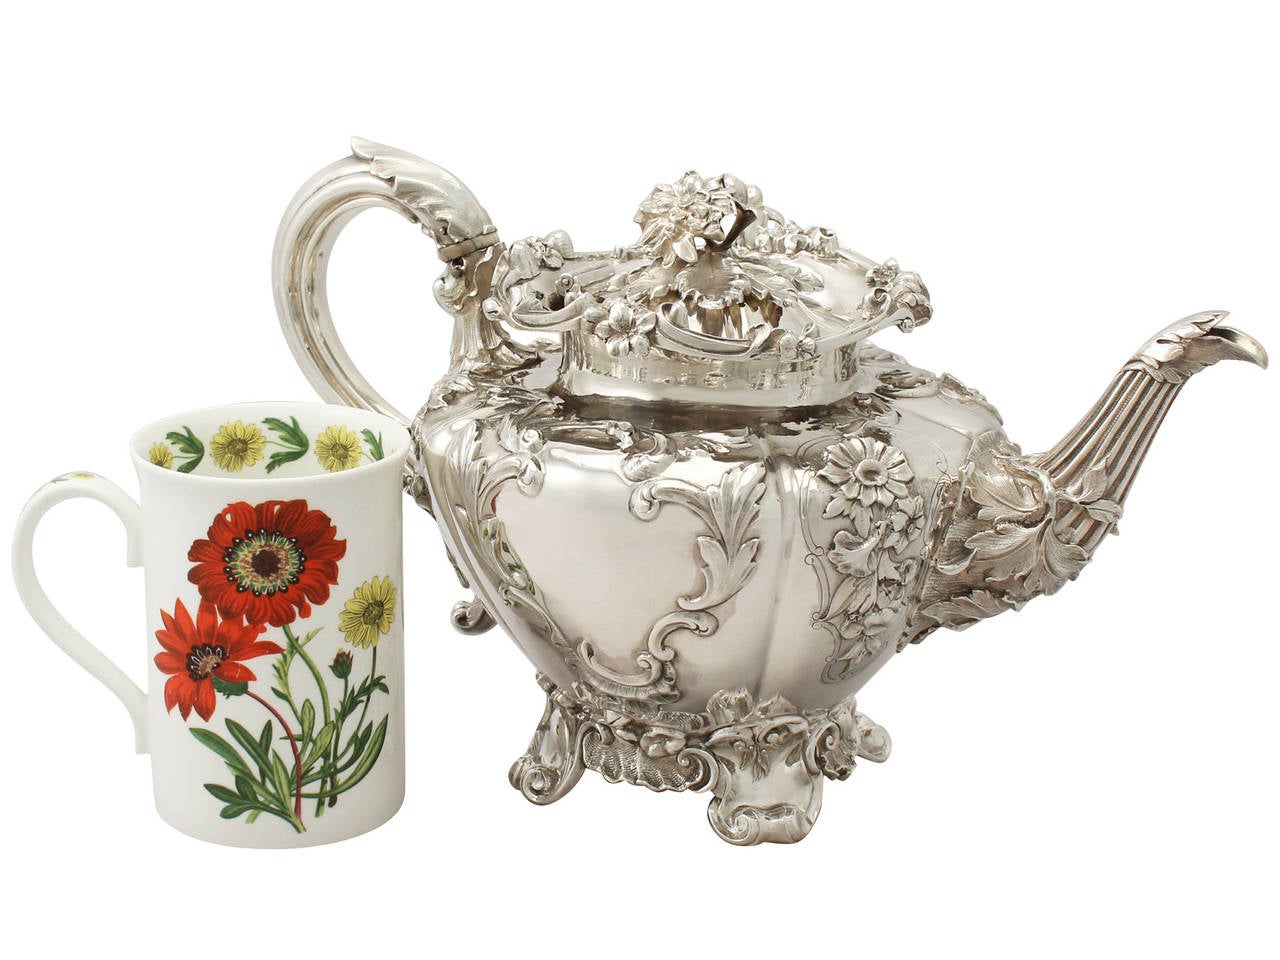 An exceptional, fine and impressive antique Victorian English sterling silver teapot; an addition to our silver teaware collection.

This exceptional antique Victorian sterling silver teapot has a compressed melon shaped form onto four bracket